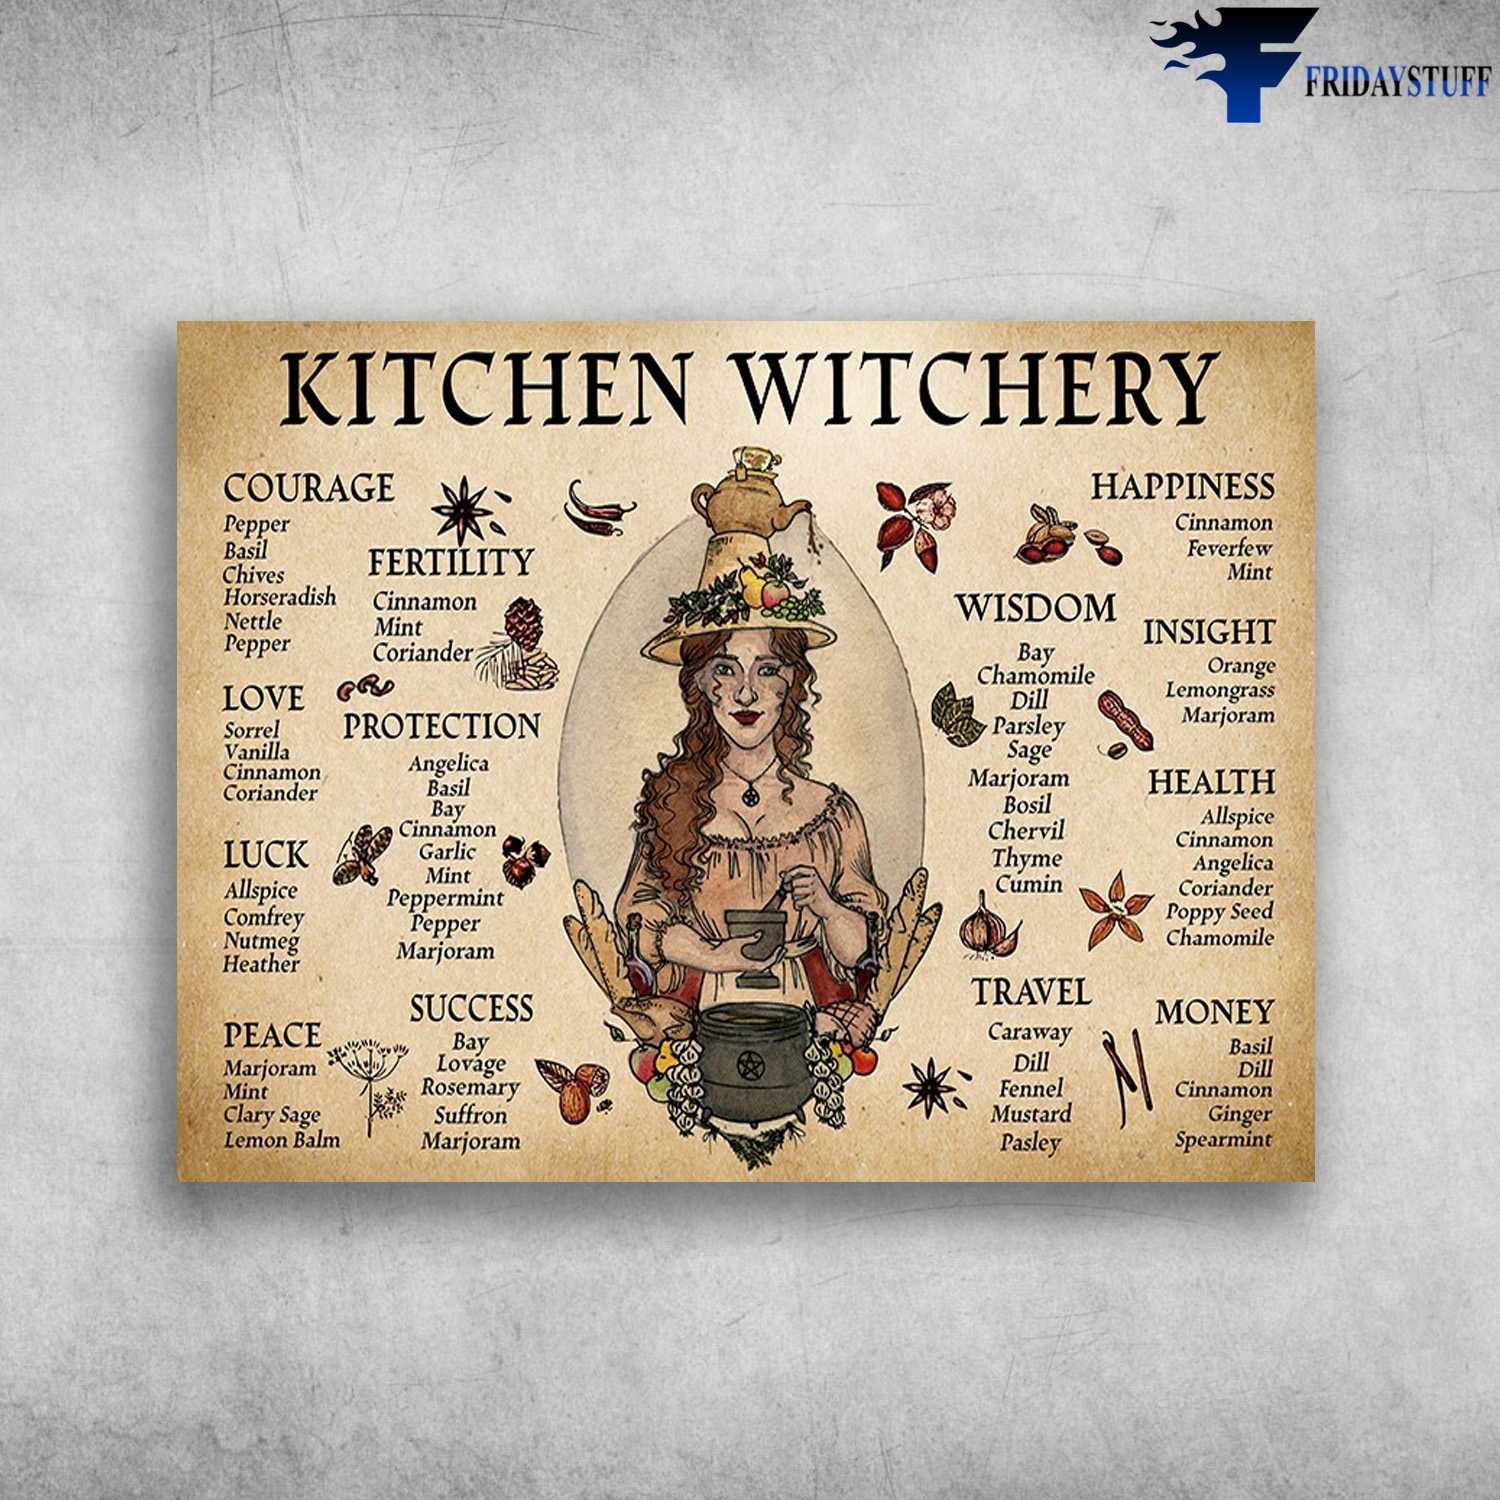 Kitchen Witchery, Witch Poster, Kitchen Poster, Courage, Fertility, Wisdom, Insight, Happiness, Money, Travel, Success, Peace, Luck